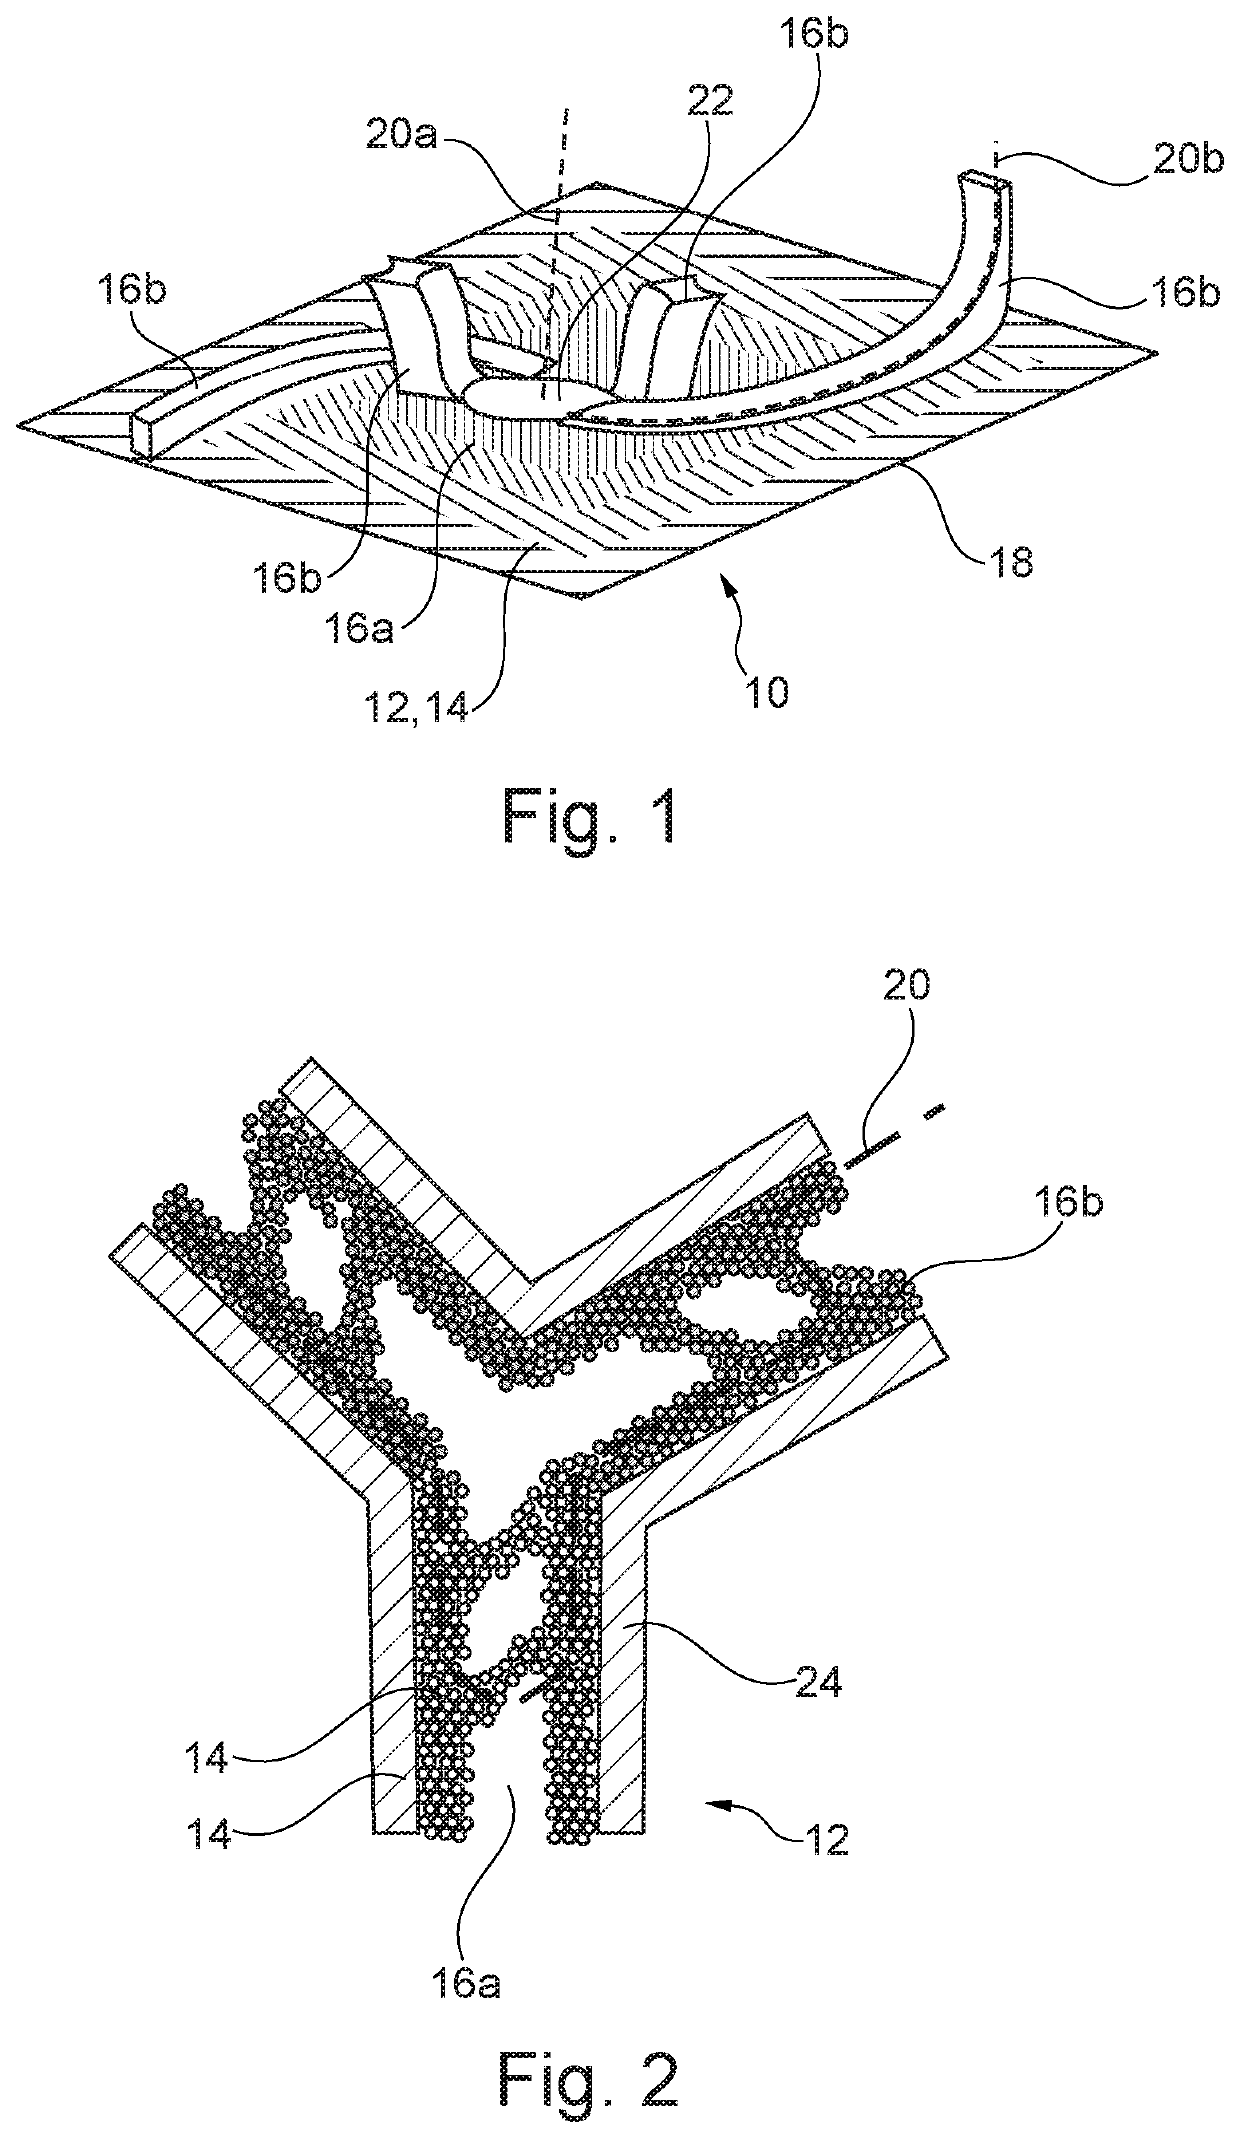 Two-phase heat transfer device for heat dissipation